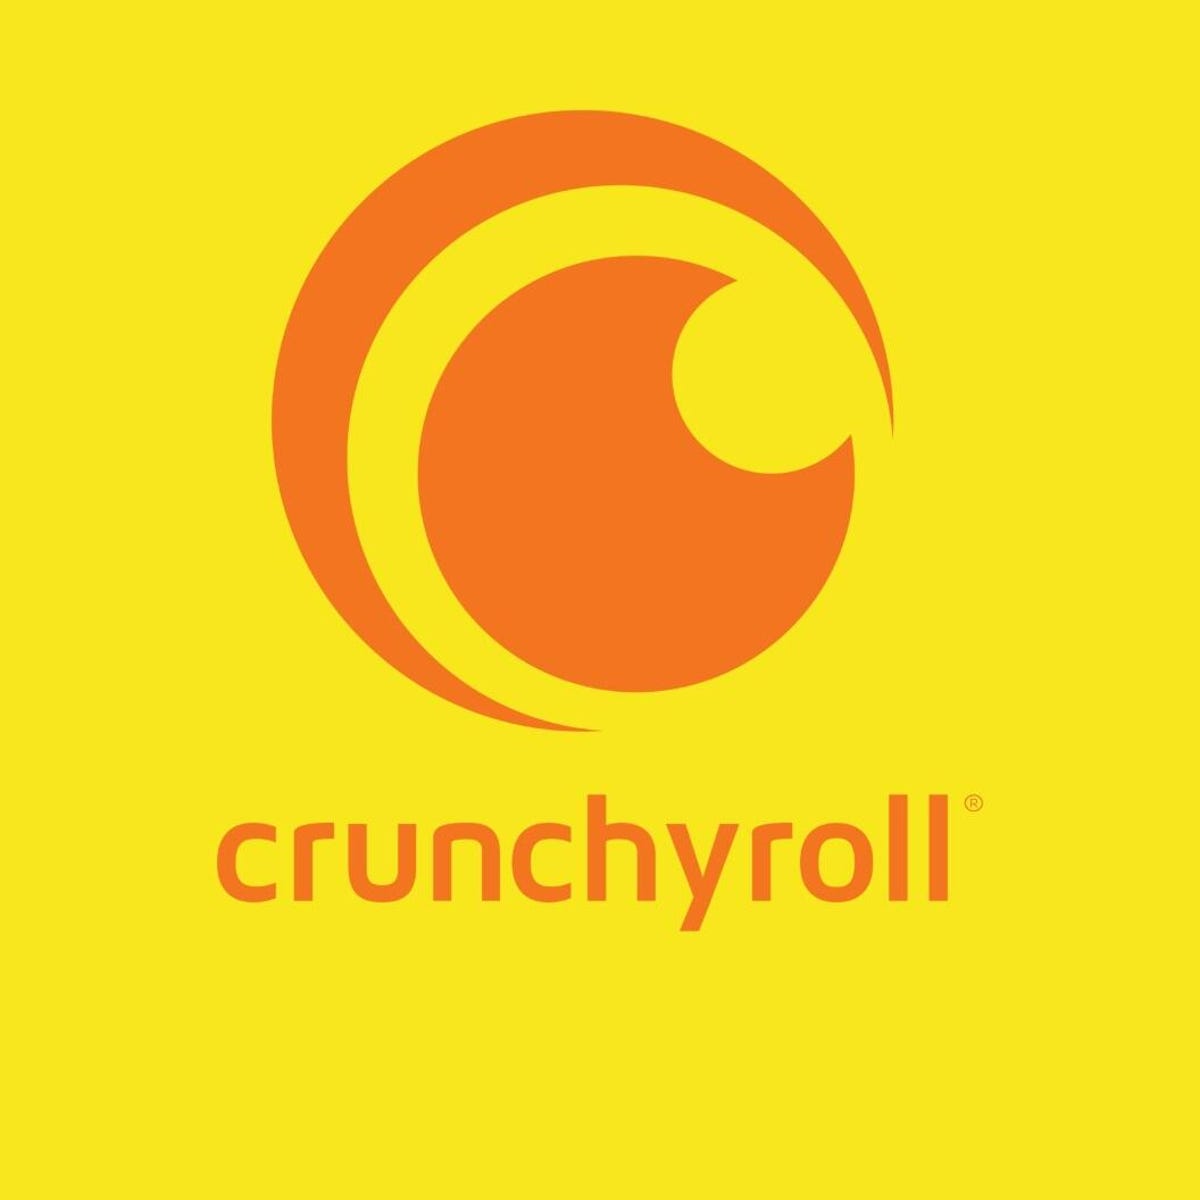 Crunchyroll Viewers: Here's How to Claim Your Share in the $16M Settlement  - CNET